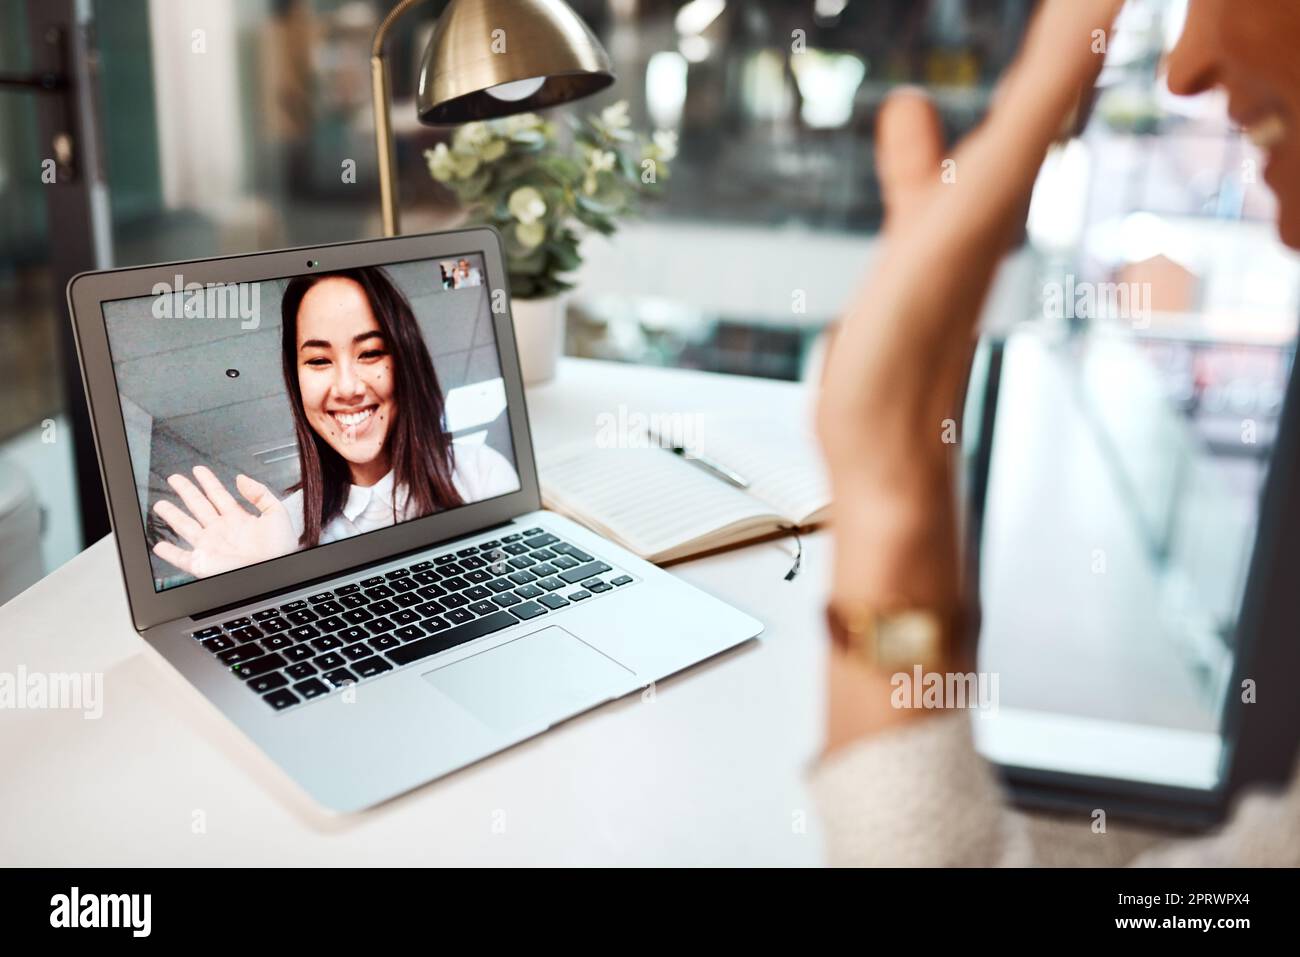 Digital collaborations done with ease across departments and locations. a young woman waving while appearing on a laptop screen during a video call. Stock Photo